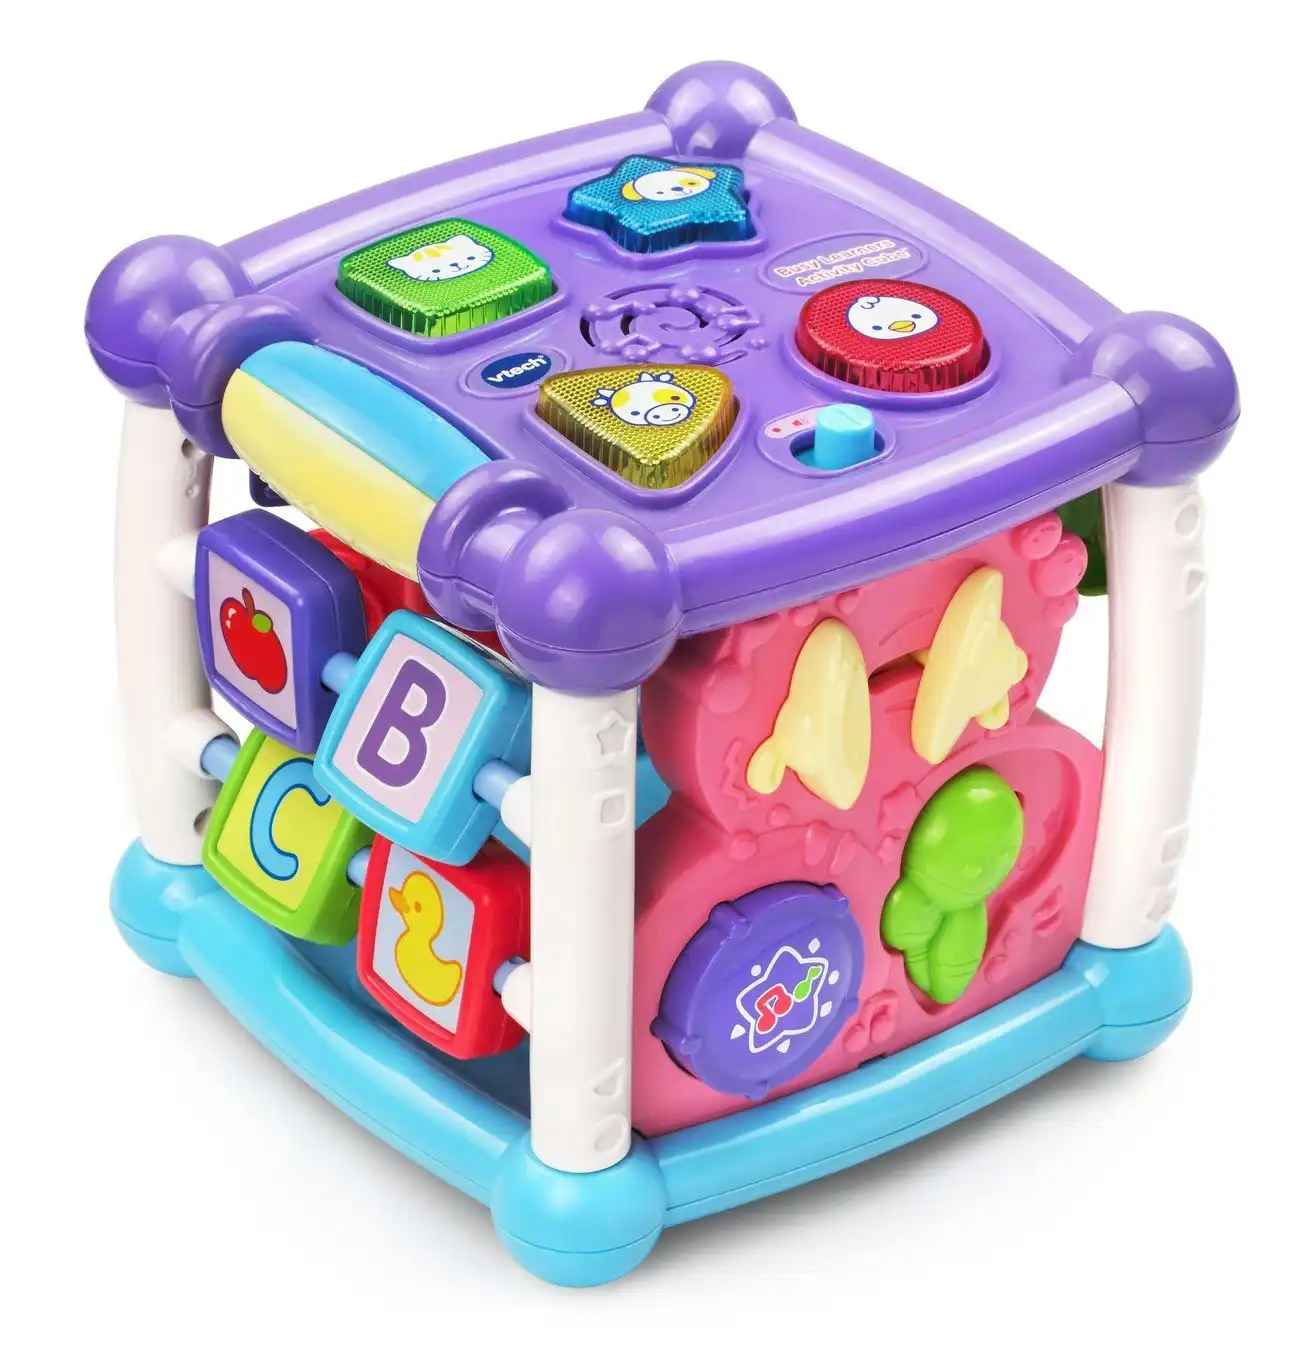 VTech - Turn & Learn Cube Pink